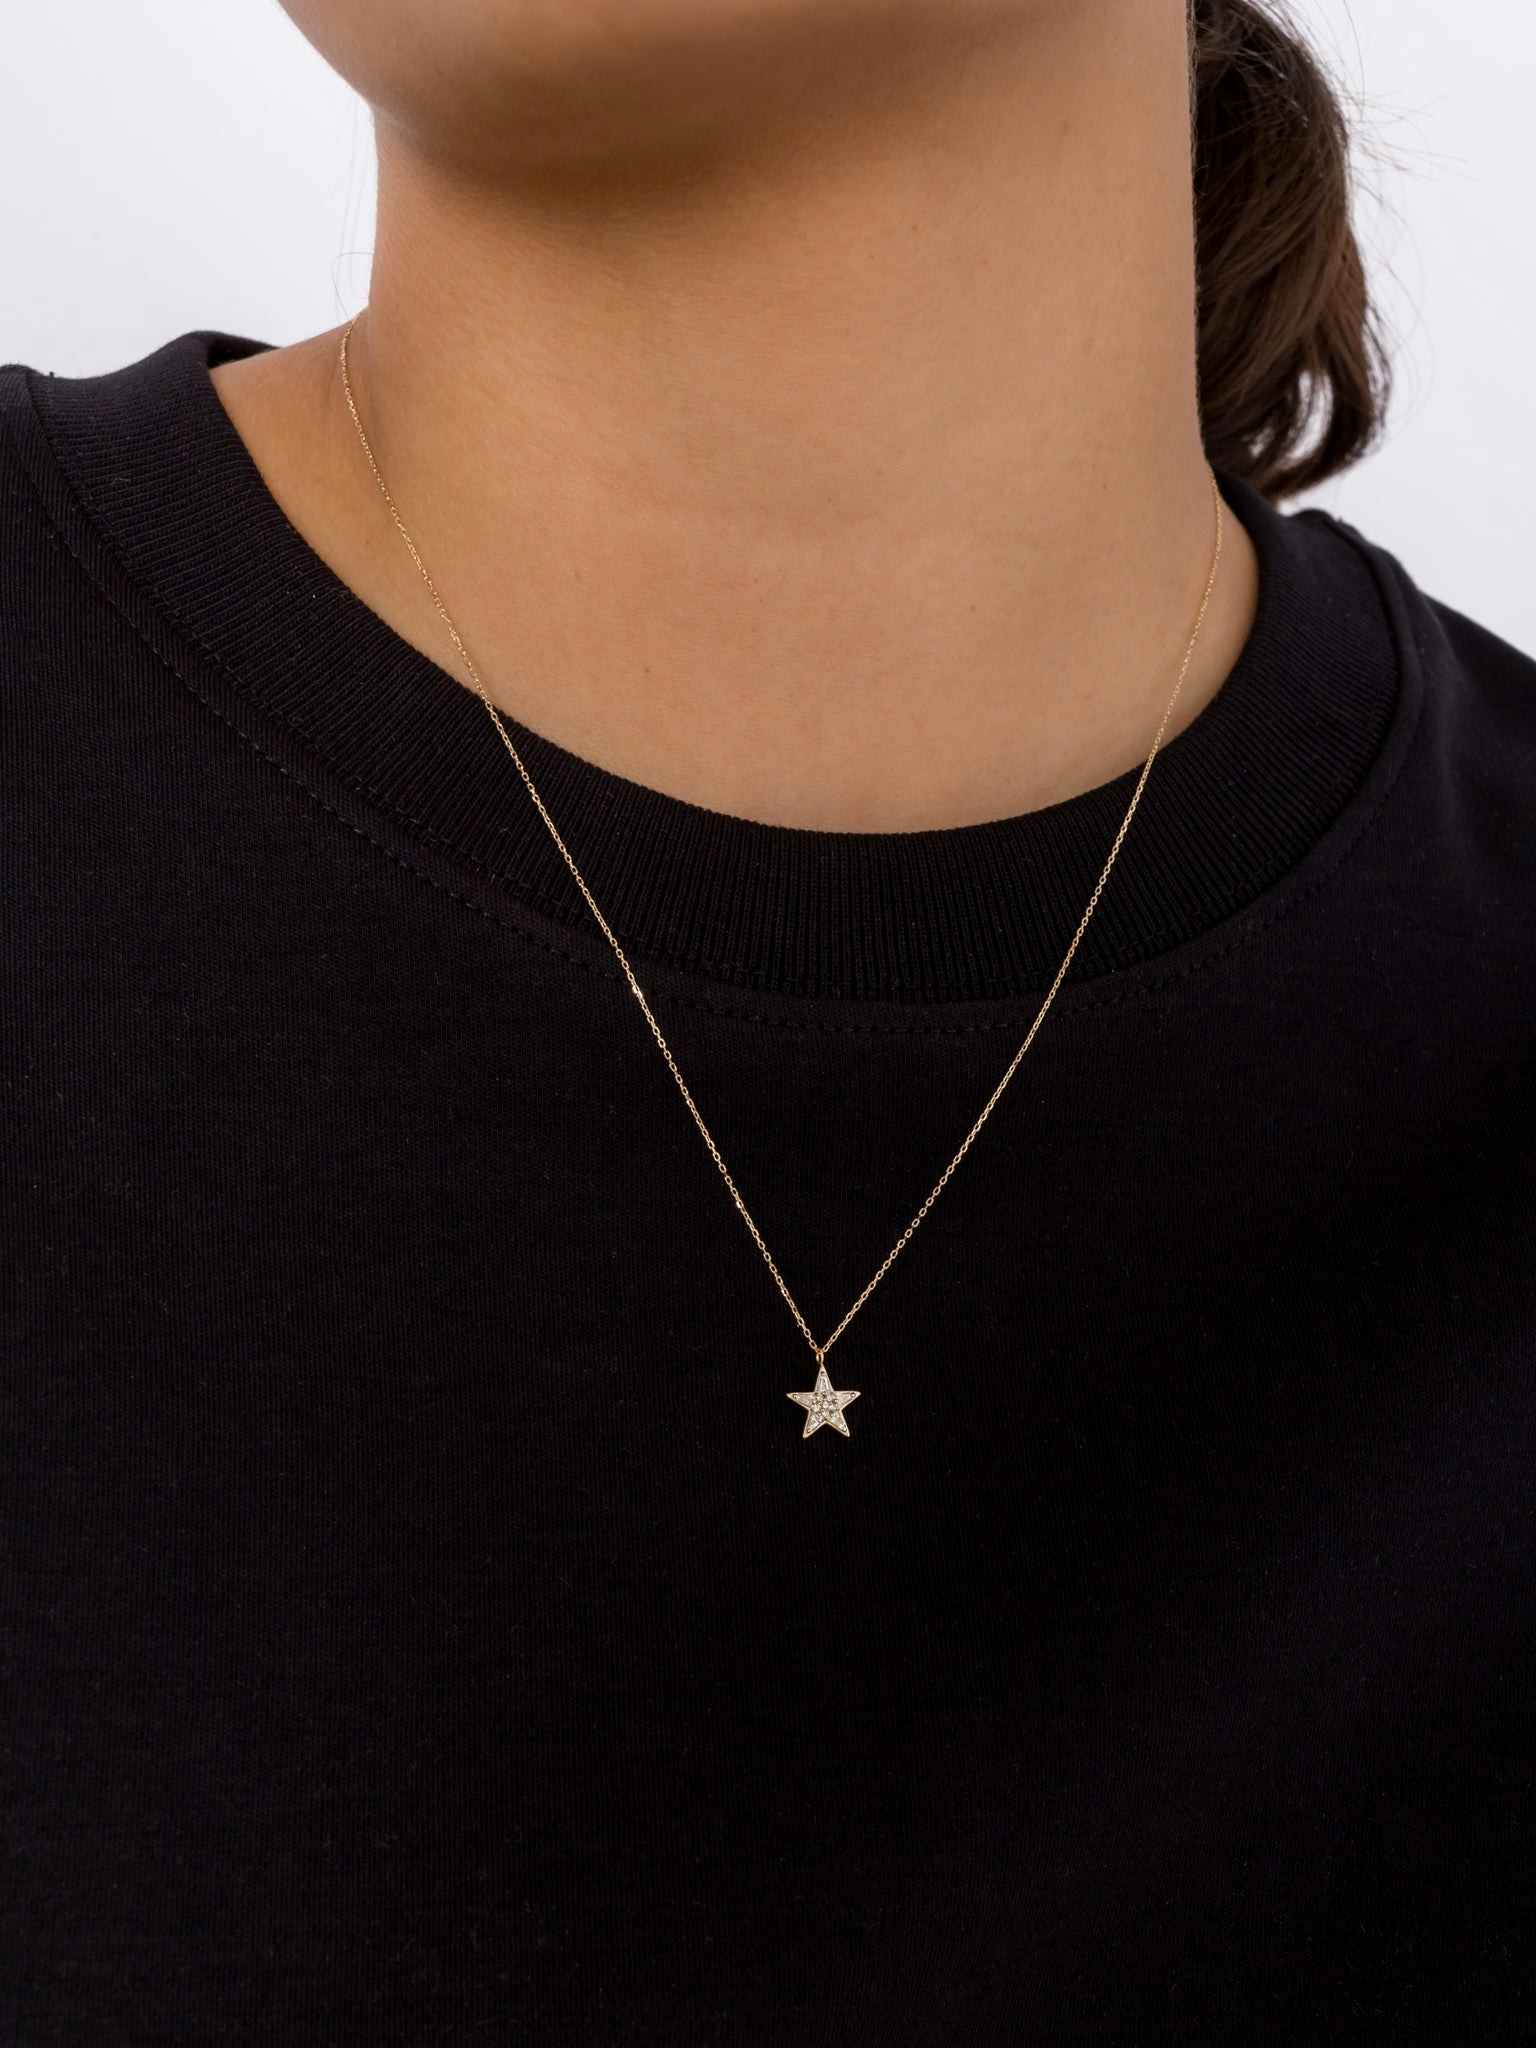 Point star pendant necklace photo 2